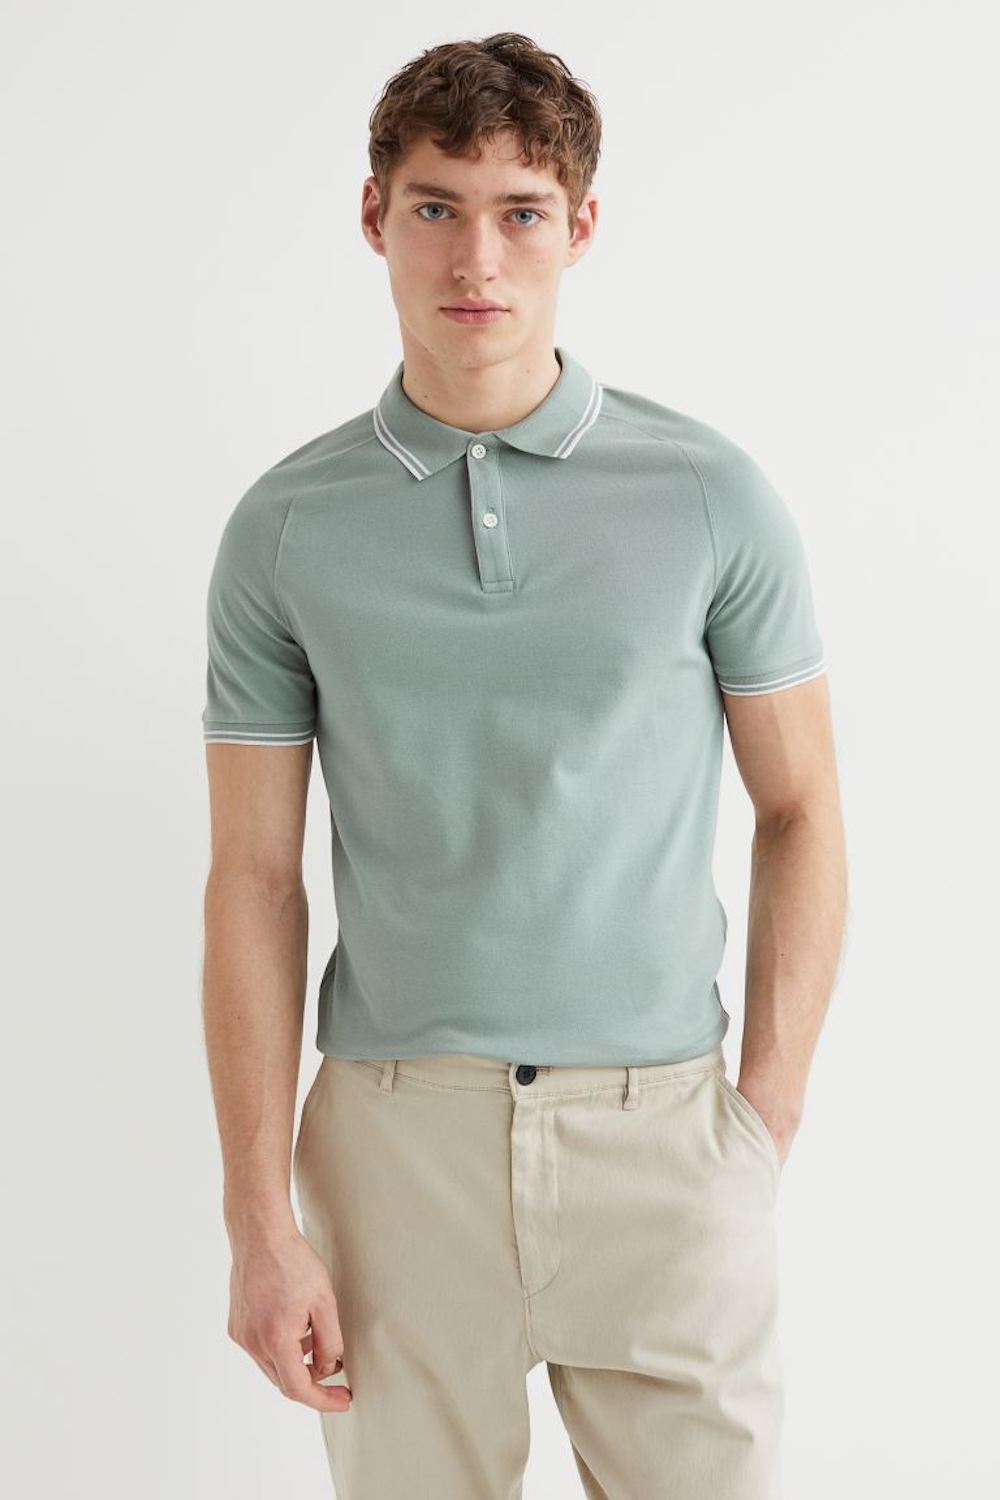 H&M fitted shirt